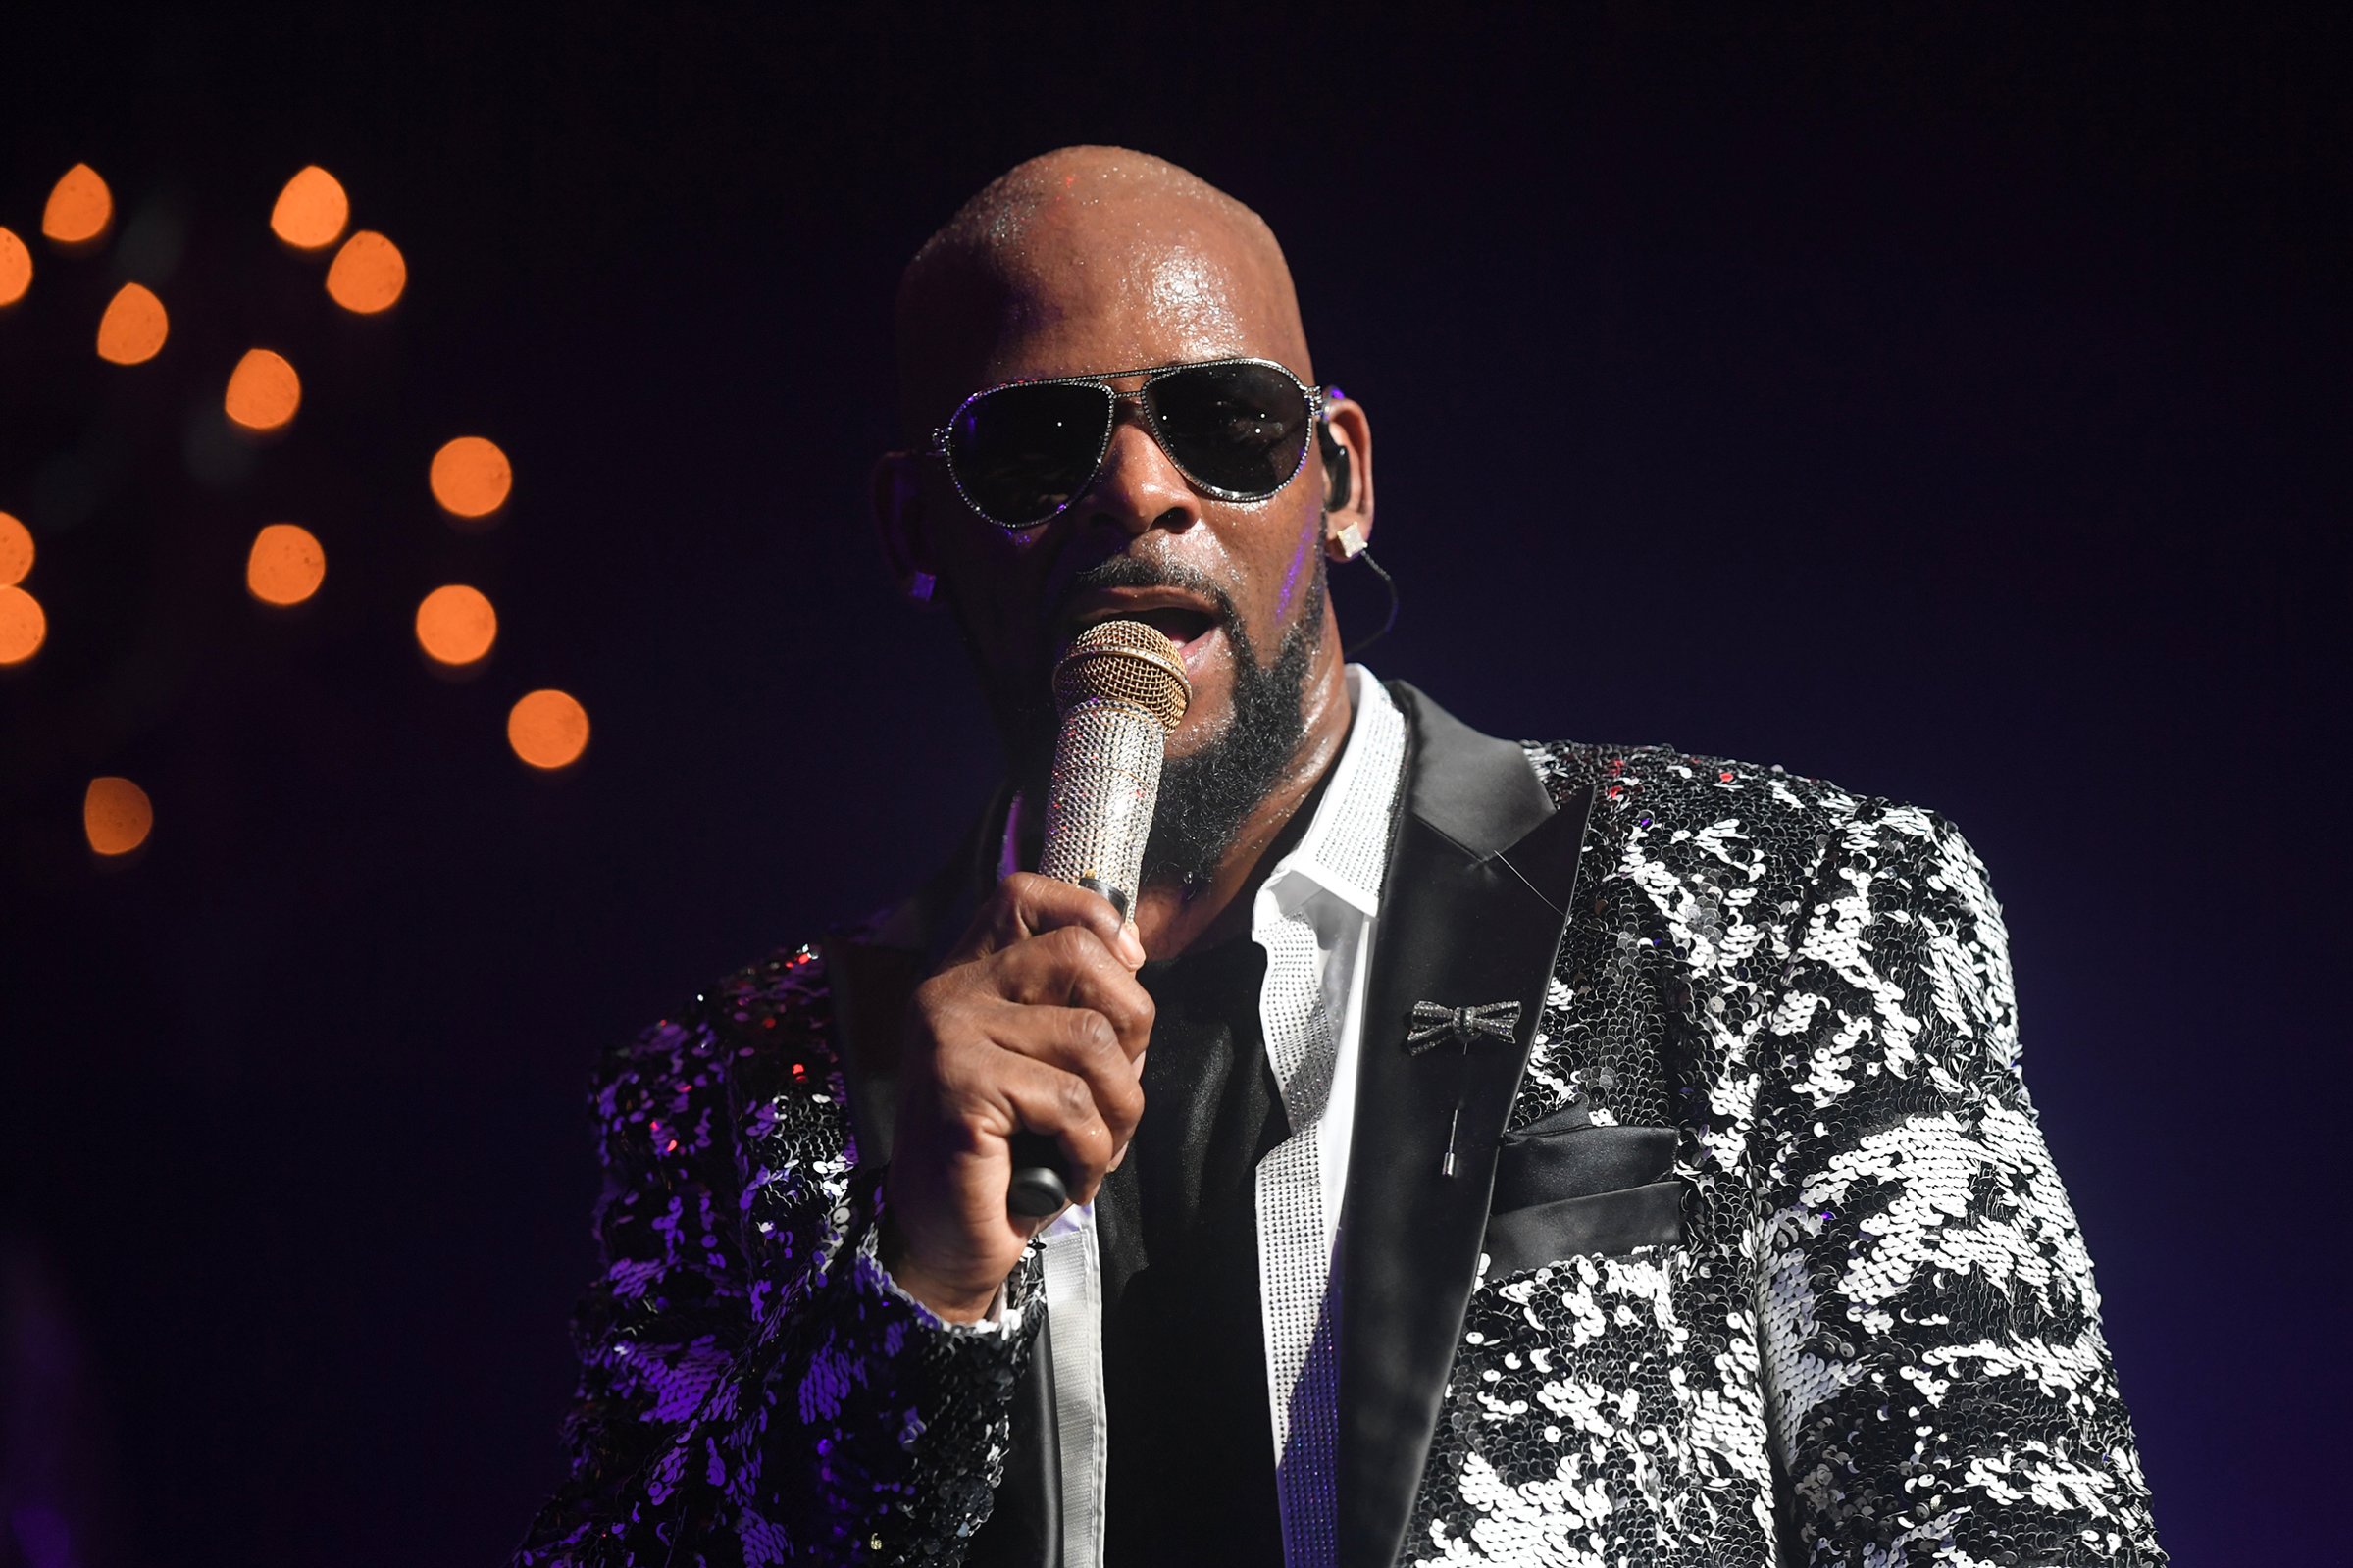 R. Kelly performs during the Holiday Jam at Fox Theater in Atlanta on Dec. 27, 2016.